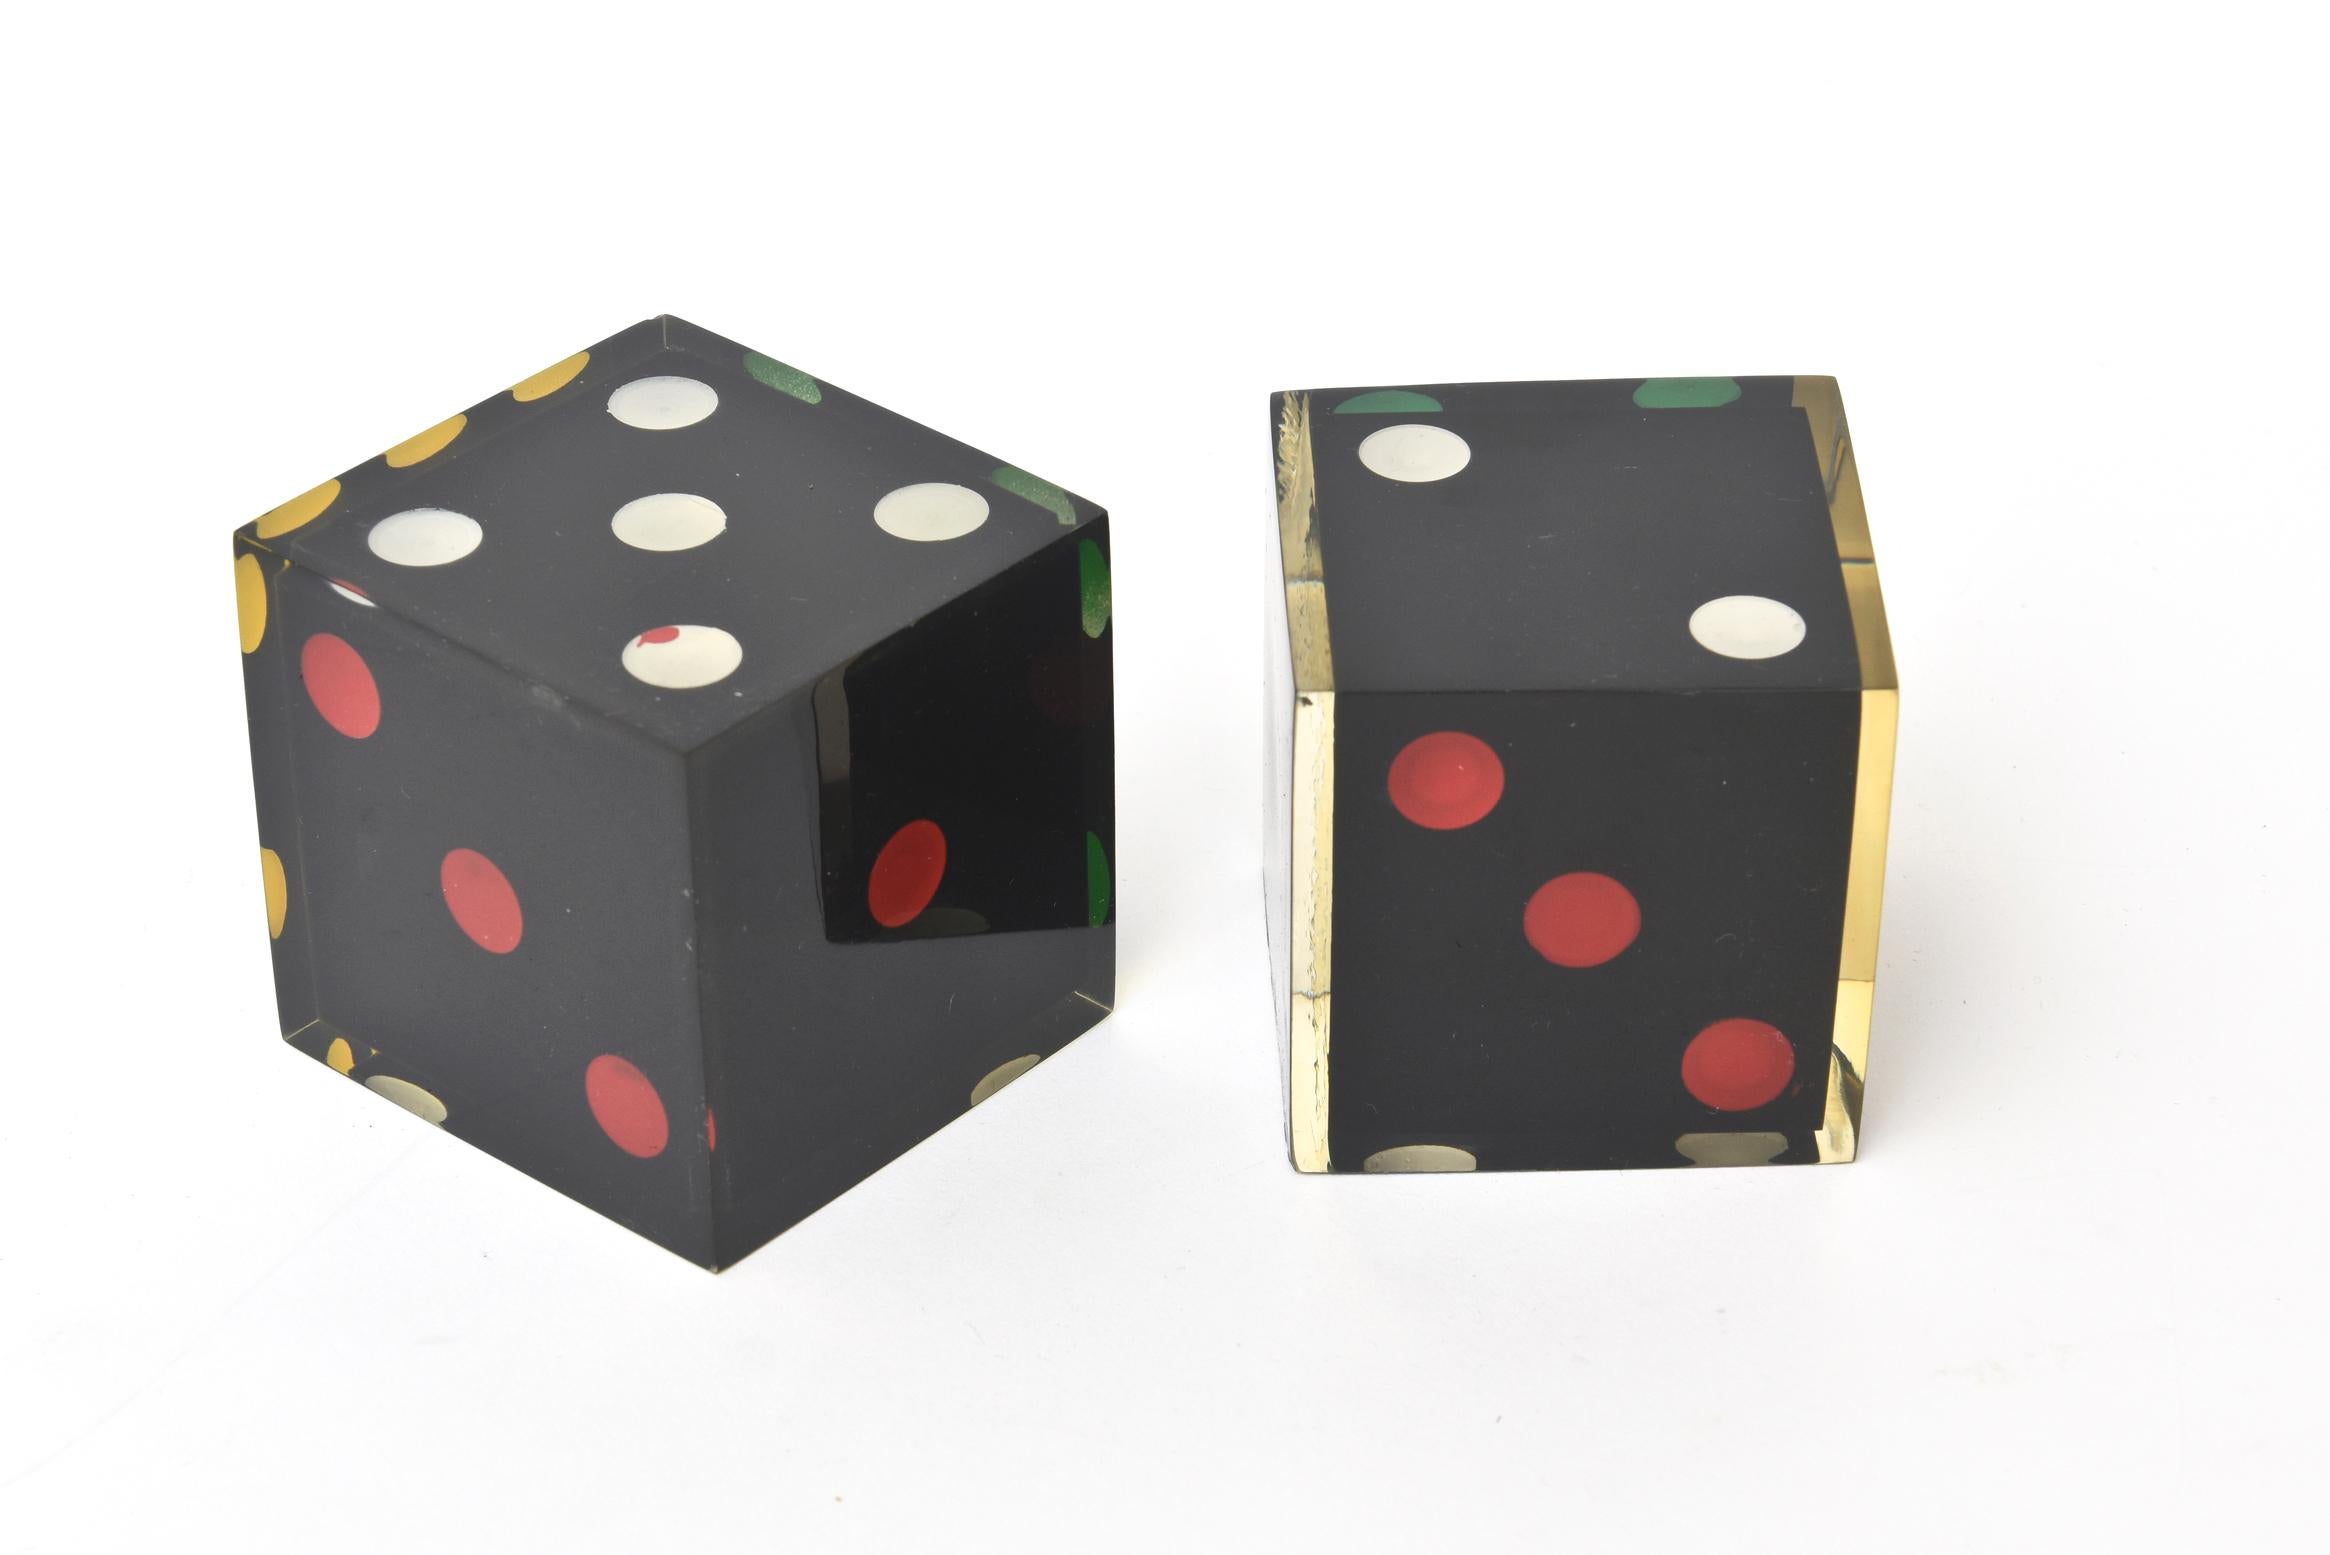 French Vintage Large Sculptural Dice Black, Red, Green, Yellow and White Pair of 3